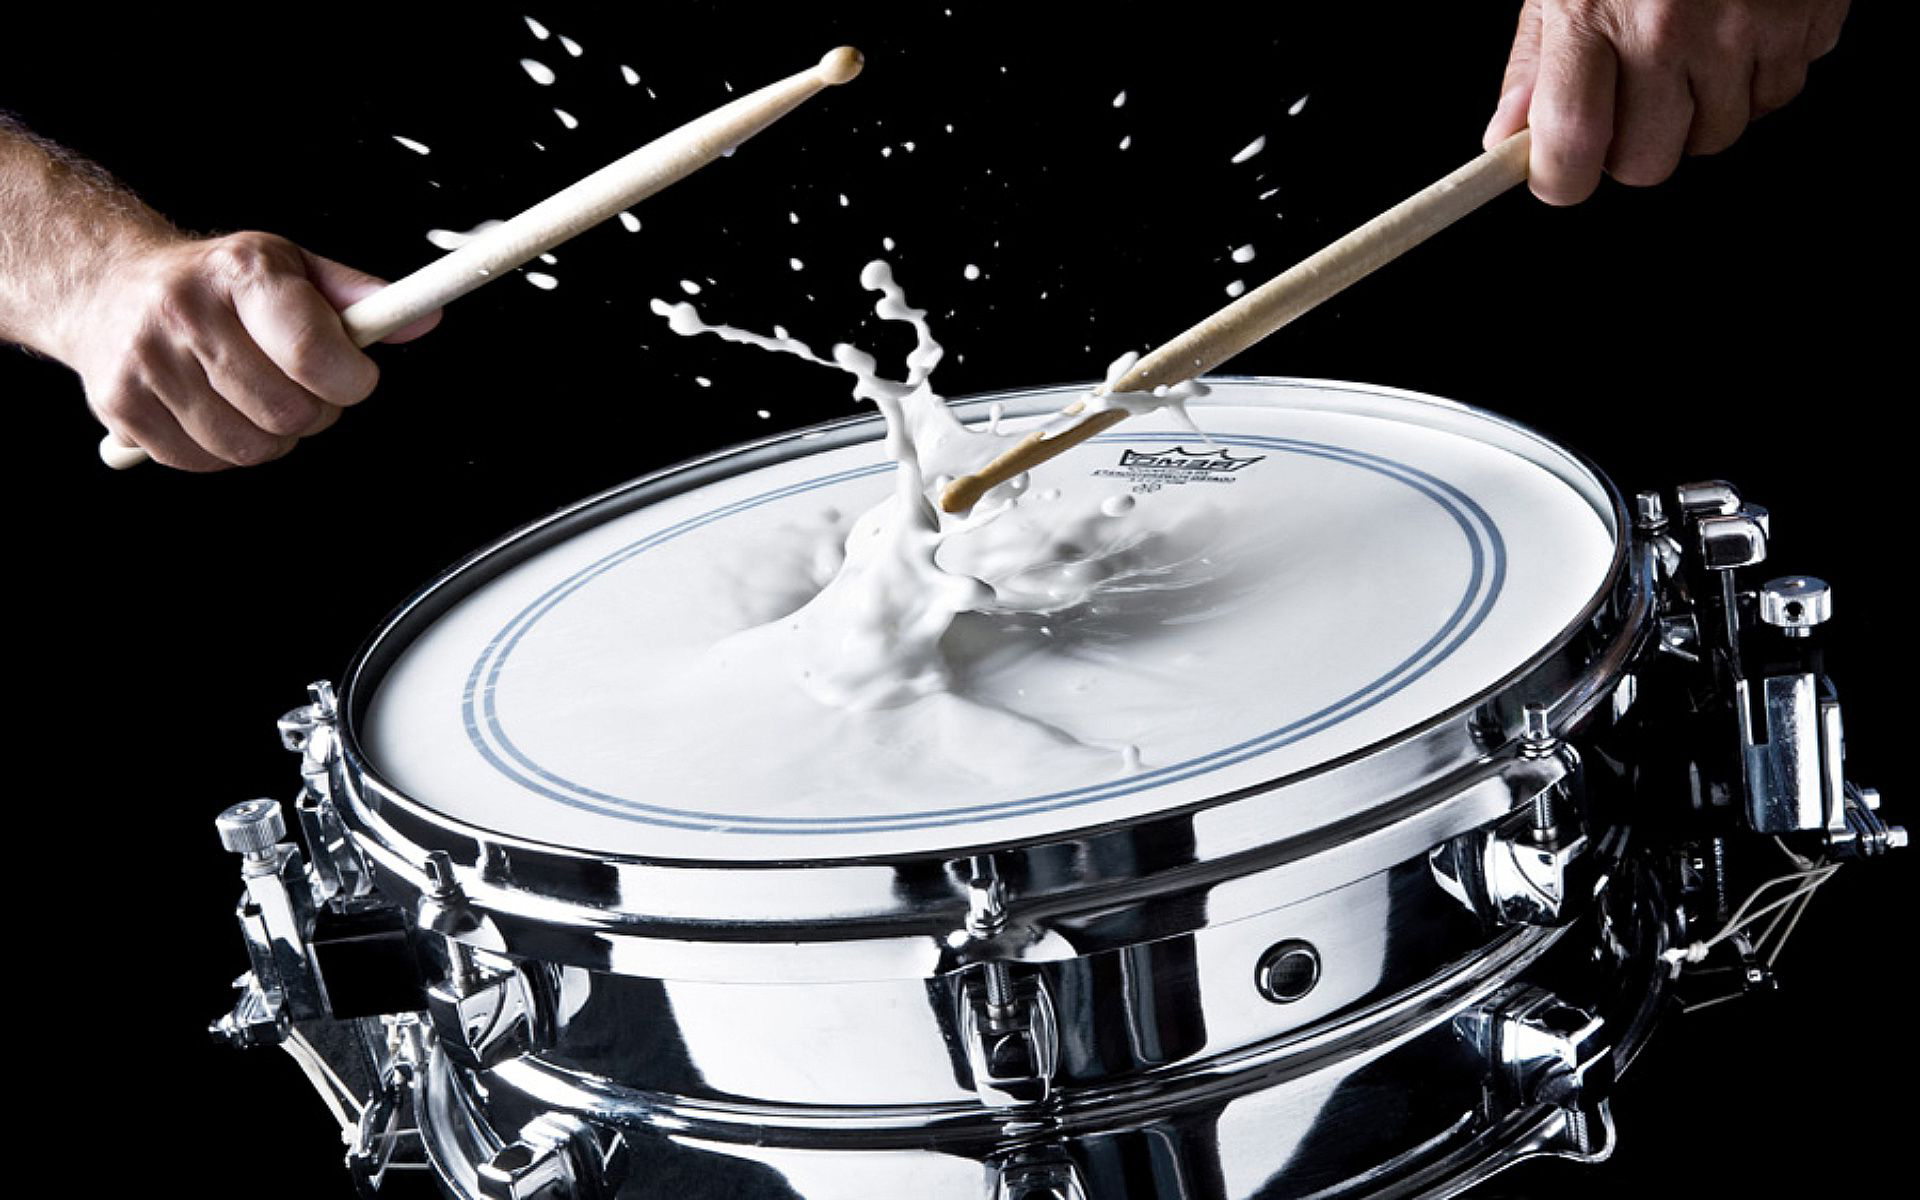 4k Drums Wallpapers High Quality Download Free HD Wallpapers Download Free Images Wallpaper [wallpaper981.blogspot.com]